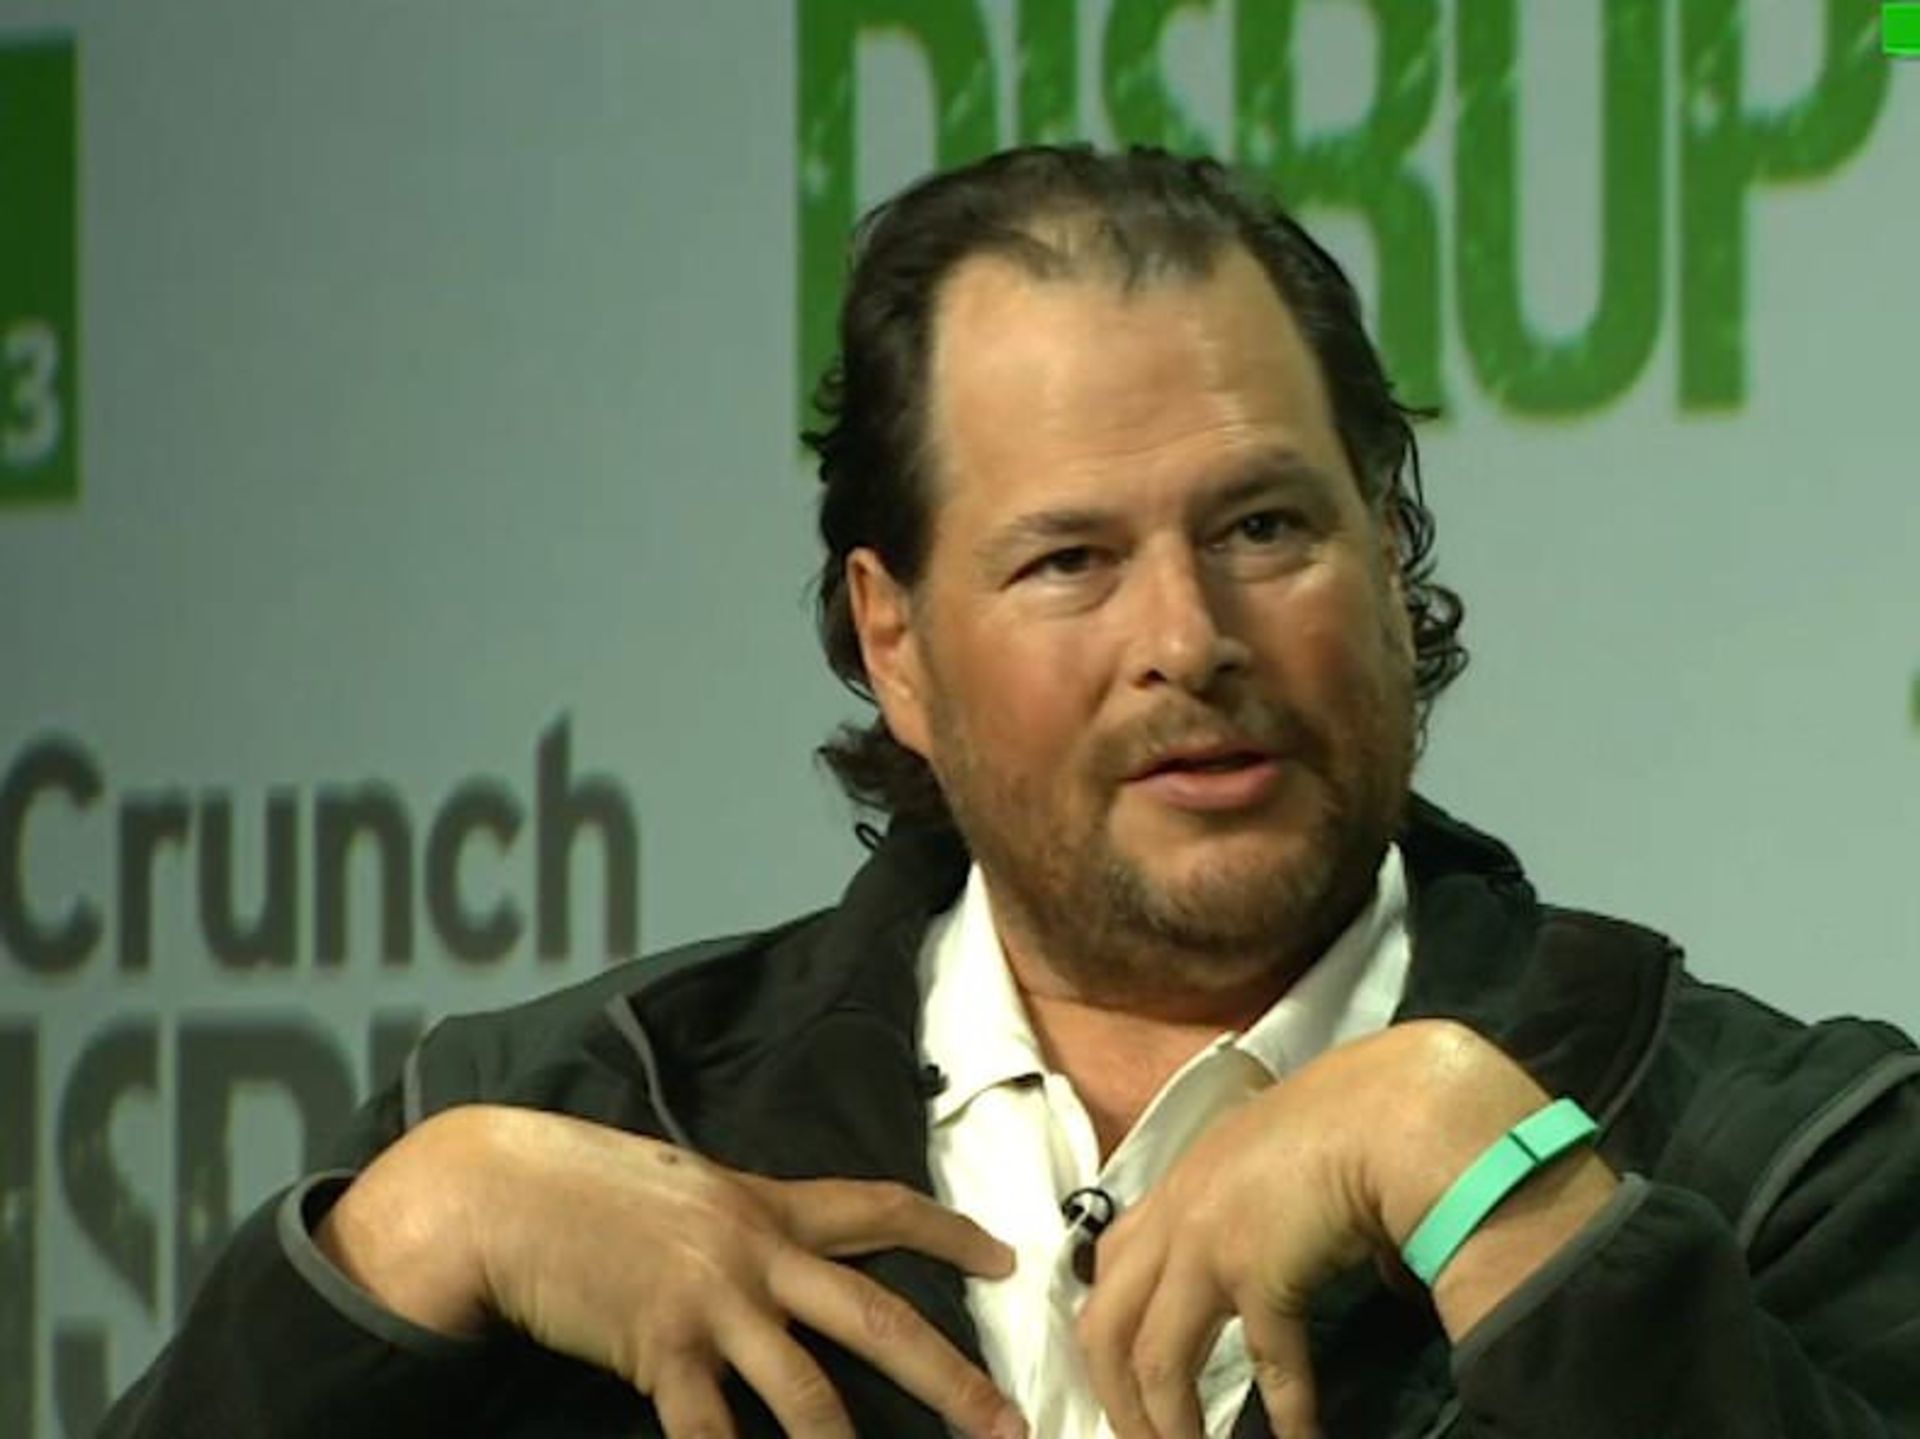 no-2-highest-paid-salesforcecoms-marc-benioff-at-5517-million